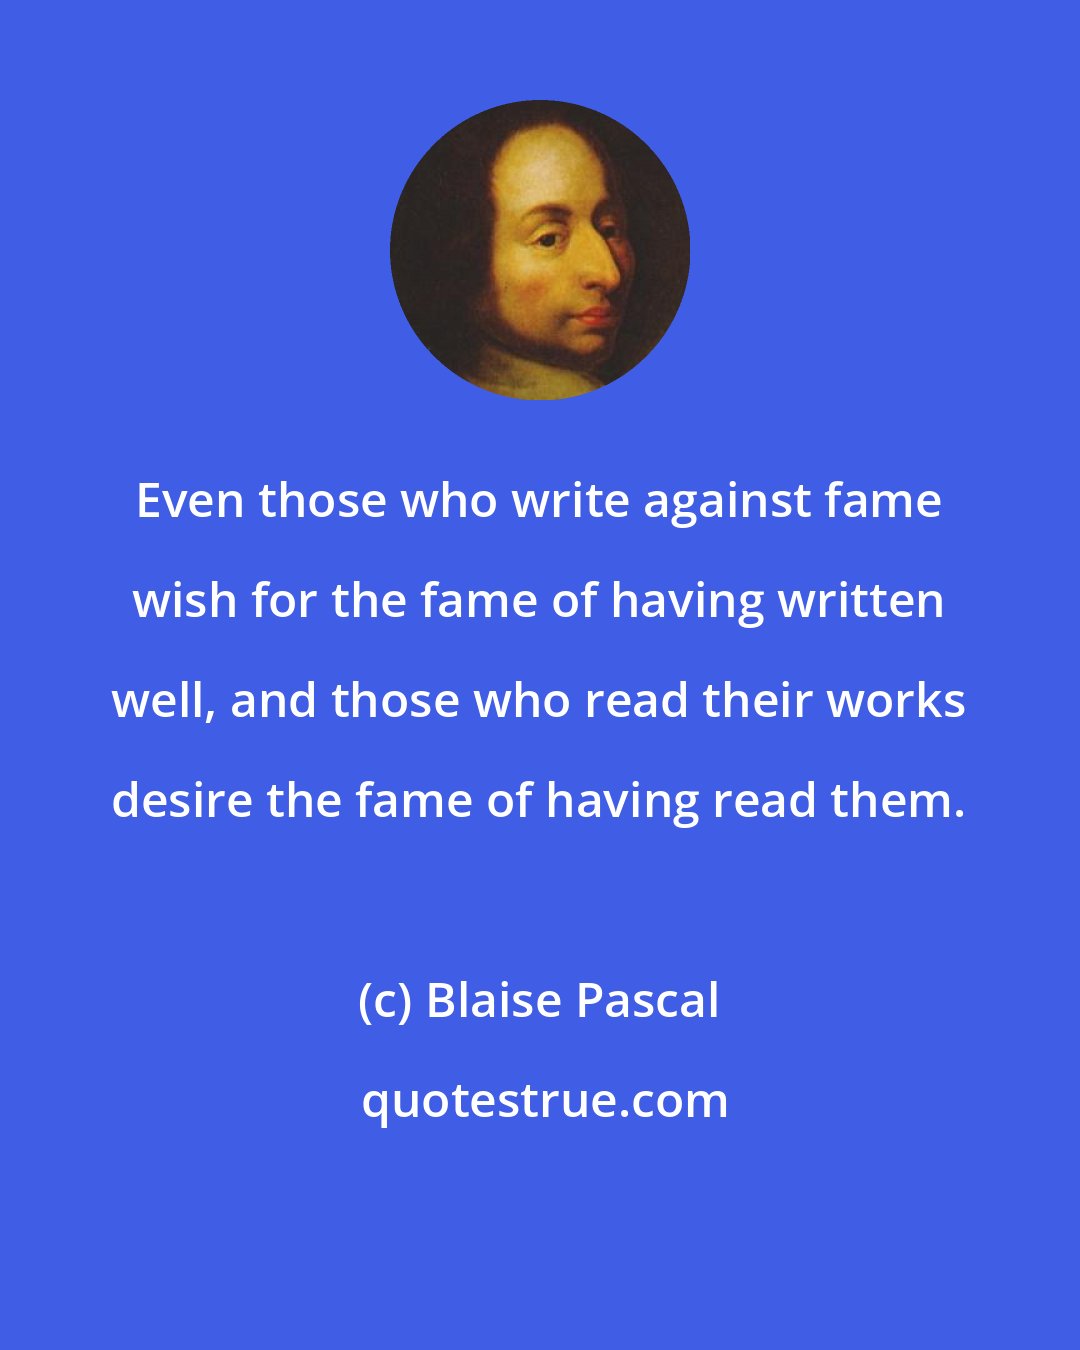 Blaise Pascal: Even those who write against fame wish for the fame of having written well, and those who read their works desire the fame of having read them.